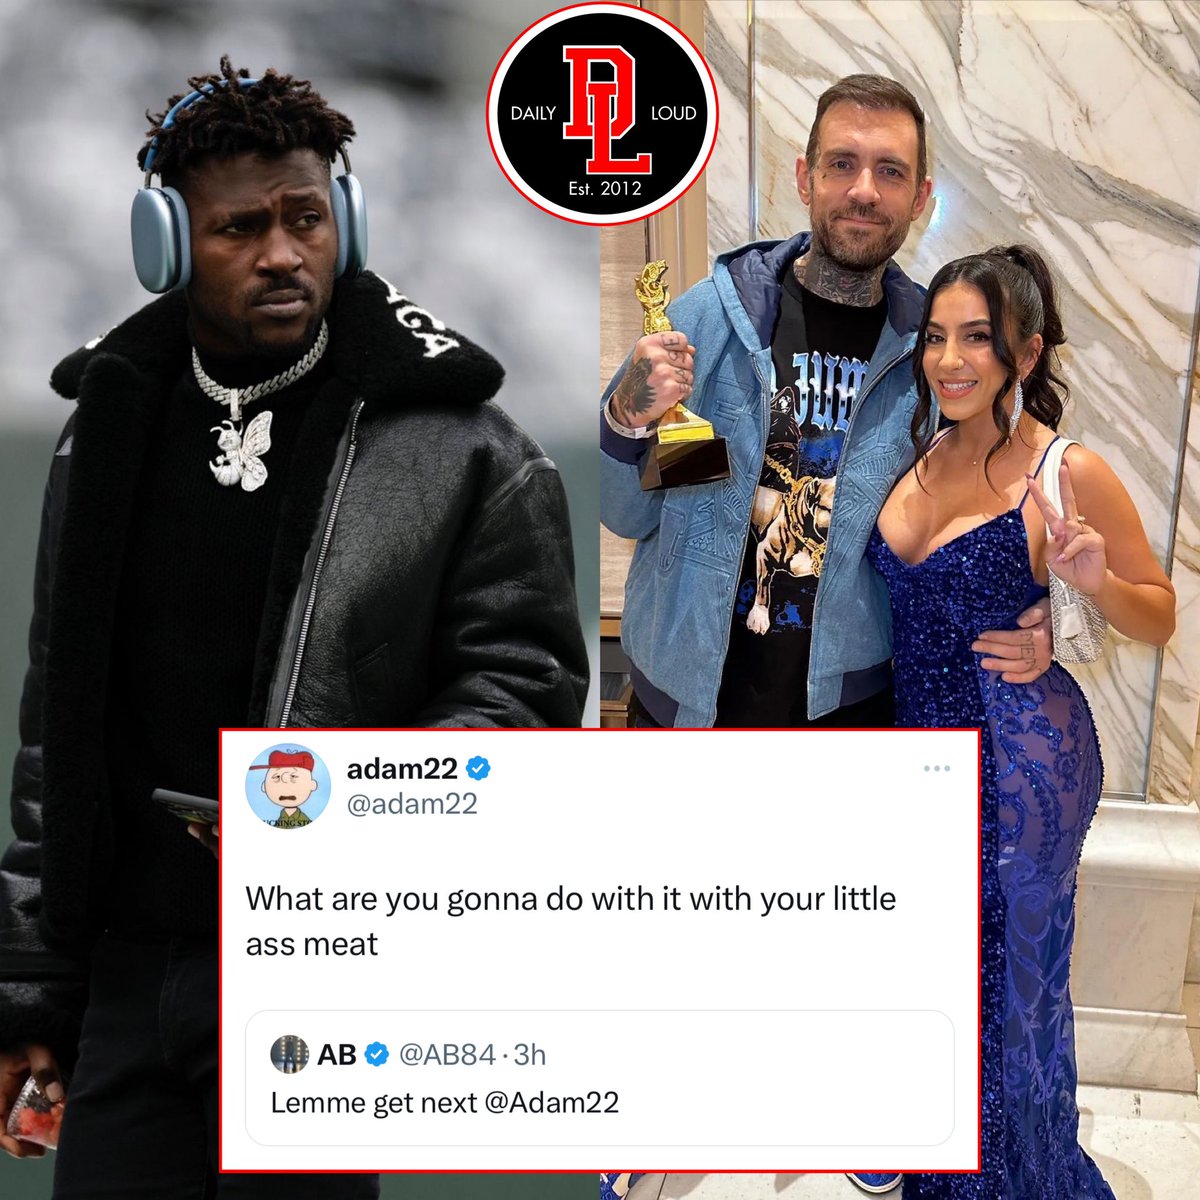 RT @DailyLoud: Antonio Brown says “lemme get next” with Adam22’s wife Lena The Plug… https://t.co/oMERZbw00g